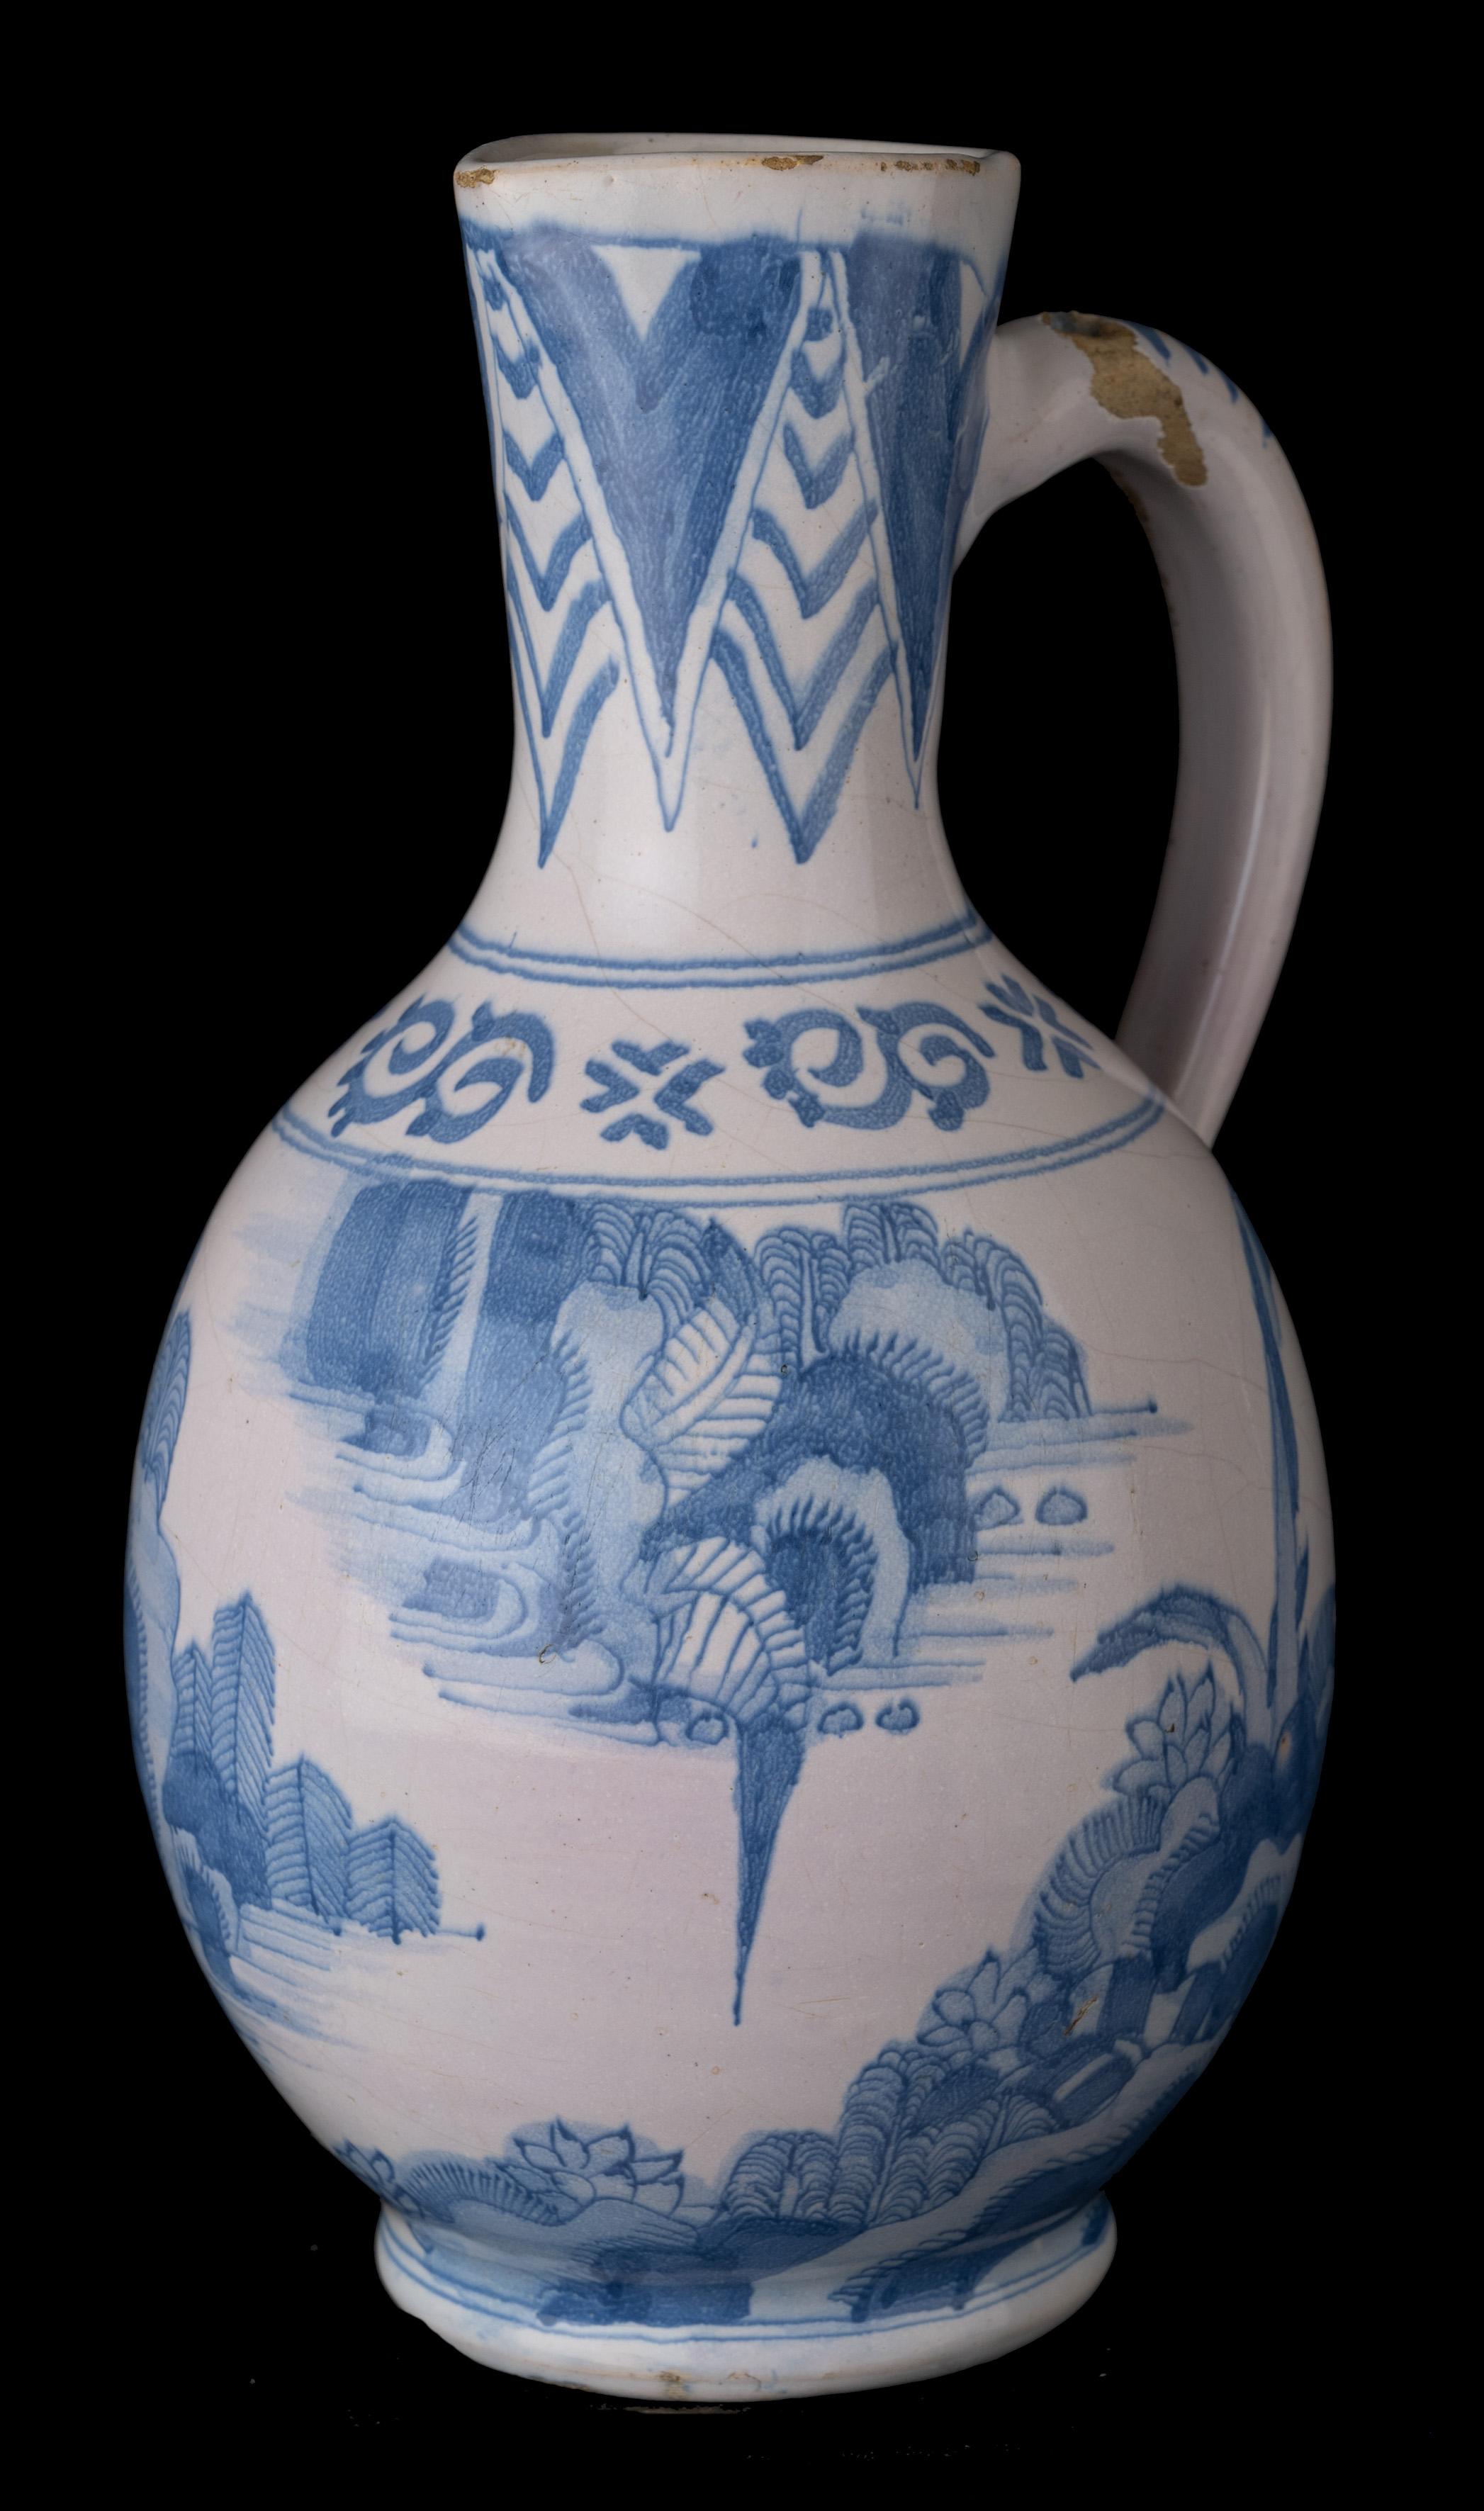 Blue and white chinoiserie wine jug Delft, 1650-1670 

The ovoid-shaped wine jug stands on a waisted foot and has a slightly conical neck with a spout and an ear-shaped handle that ends in a rat tail. The top of the handle is pierced for a metal